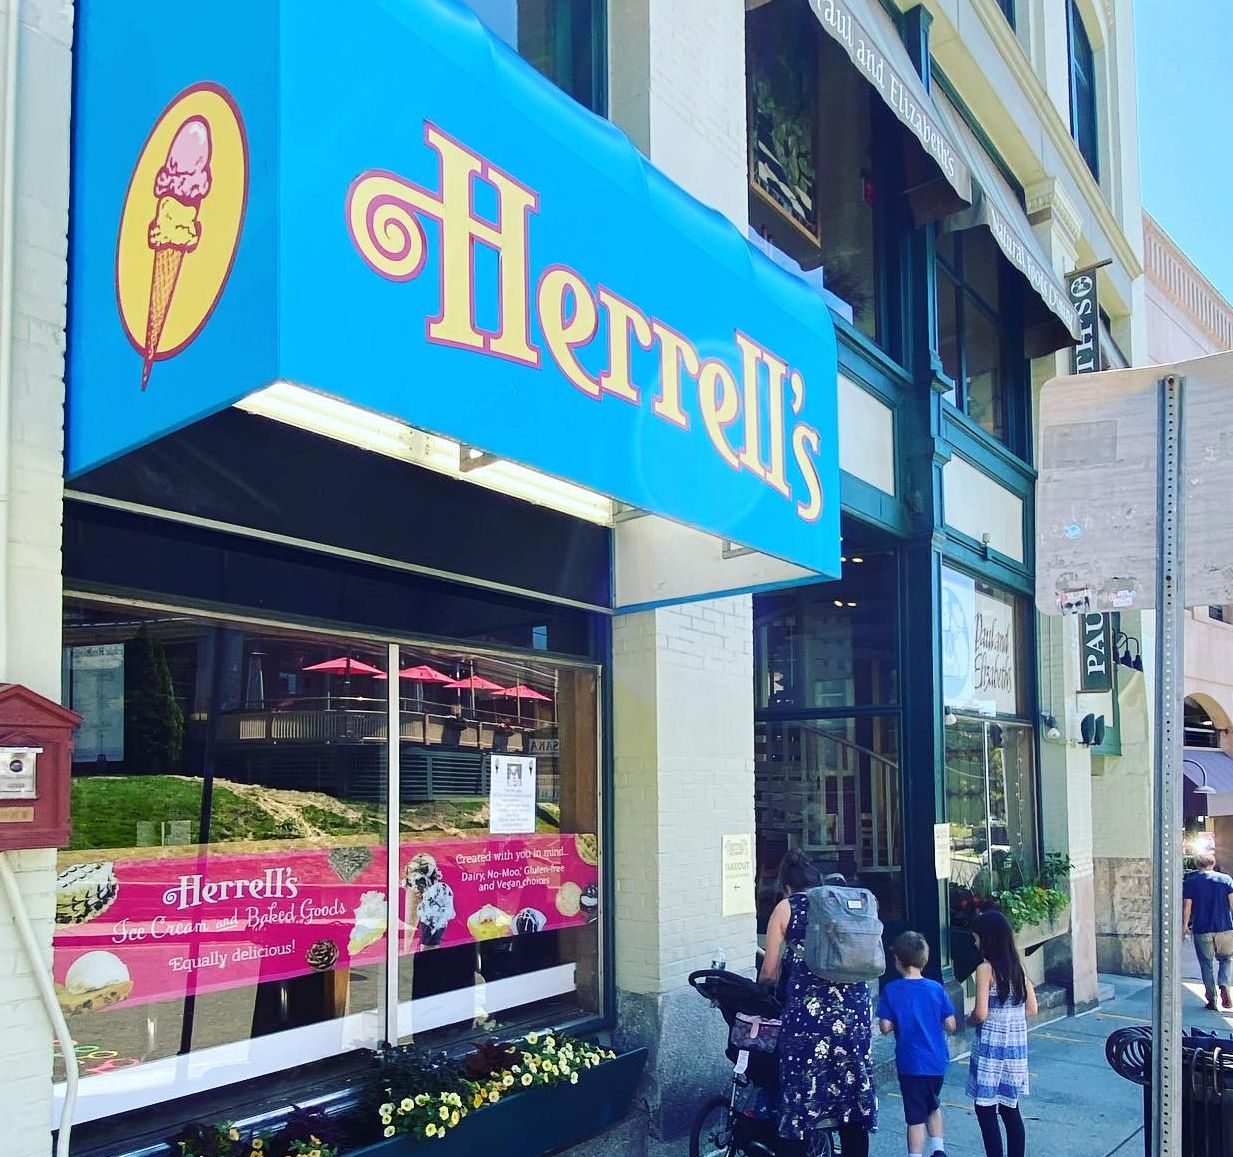 Herrell's offers handcrafted ice creams in an array of unique flavors with a wide selection of toppings.